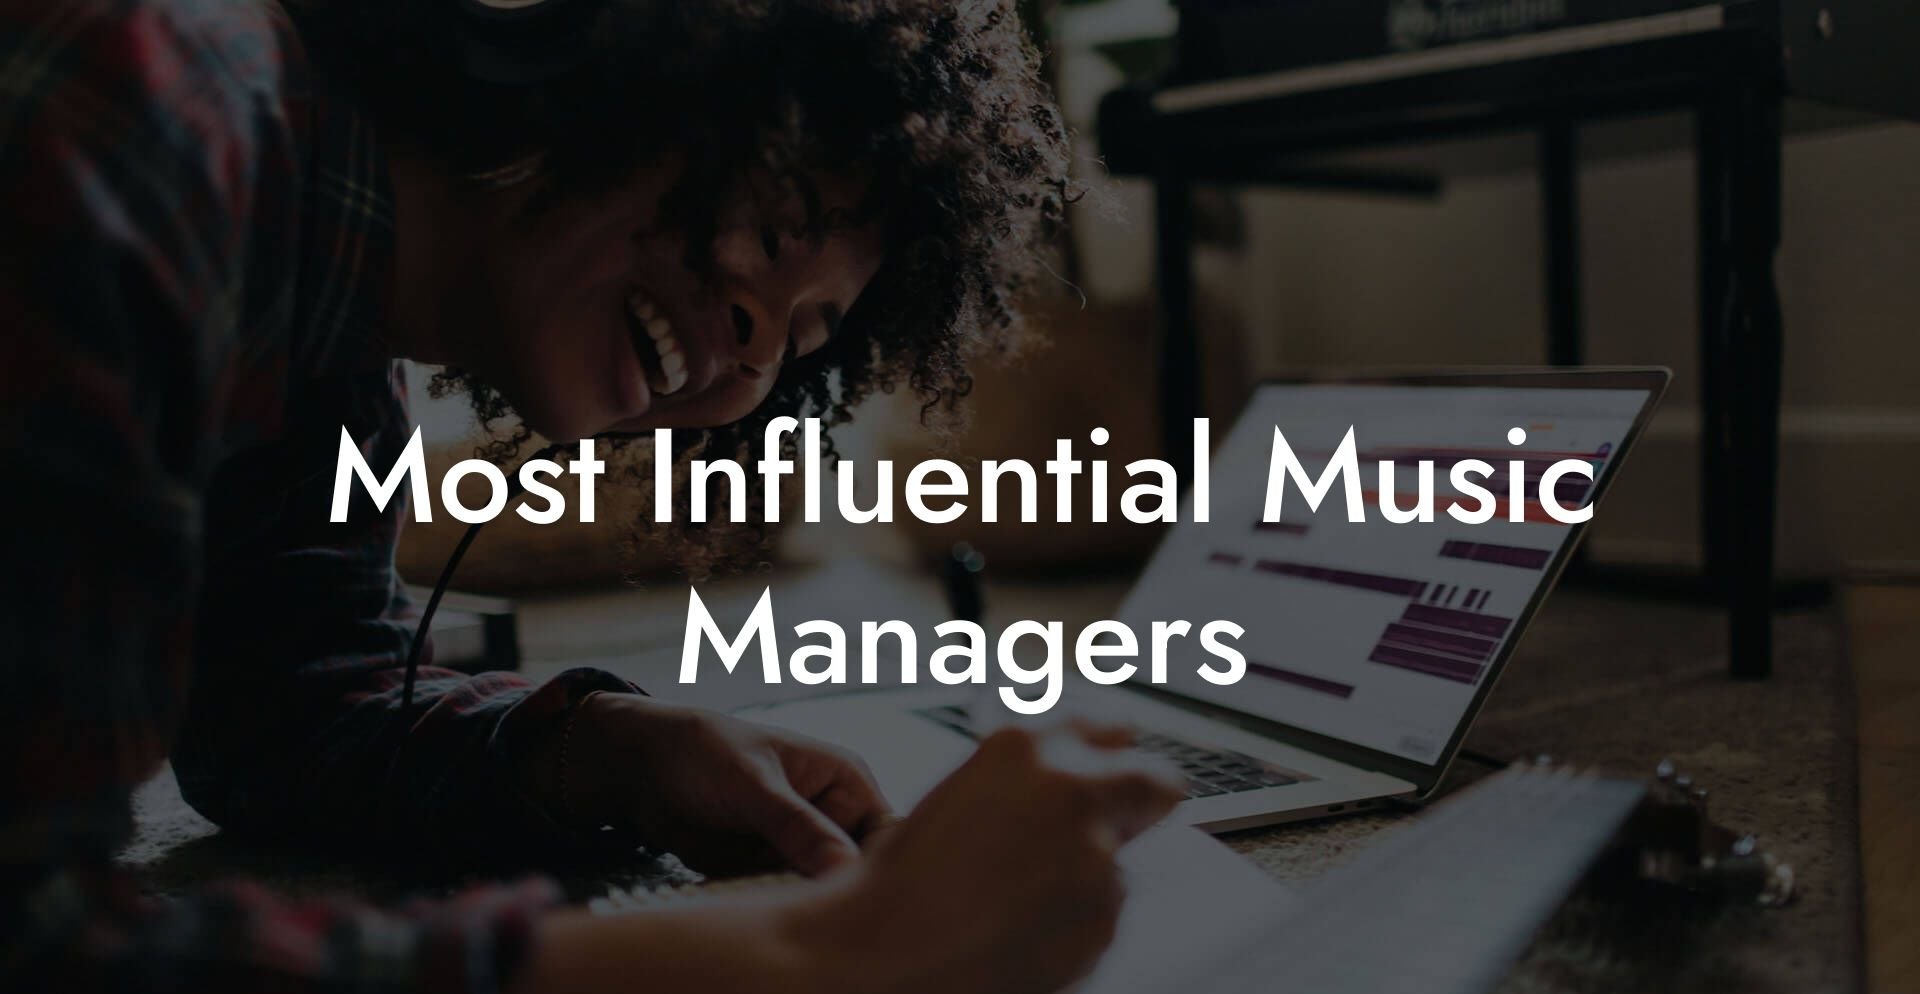 Most Influential Music Managers